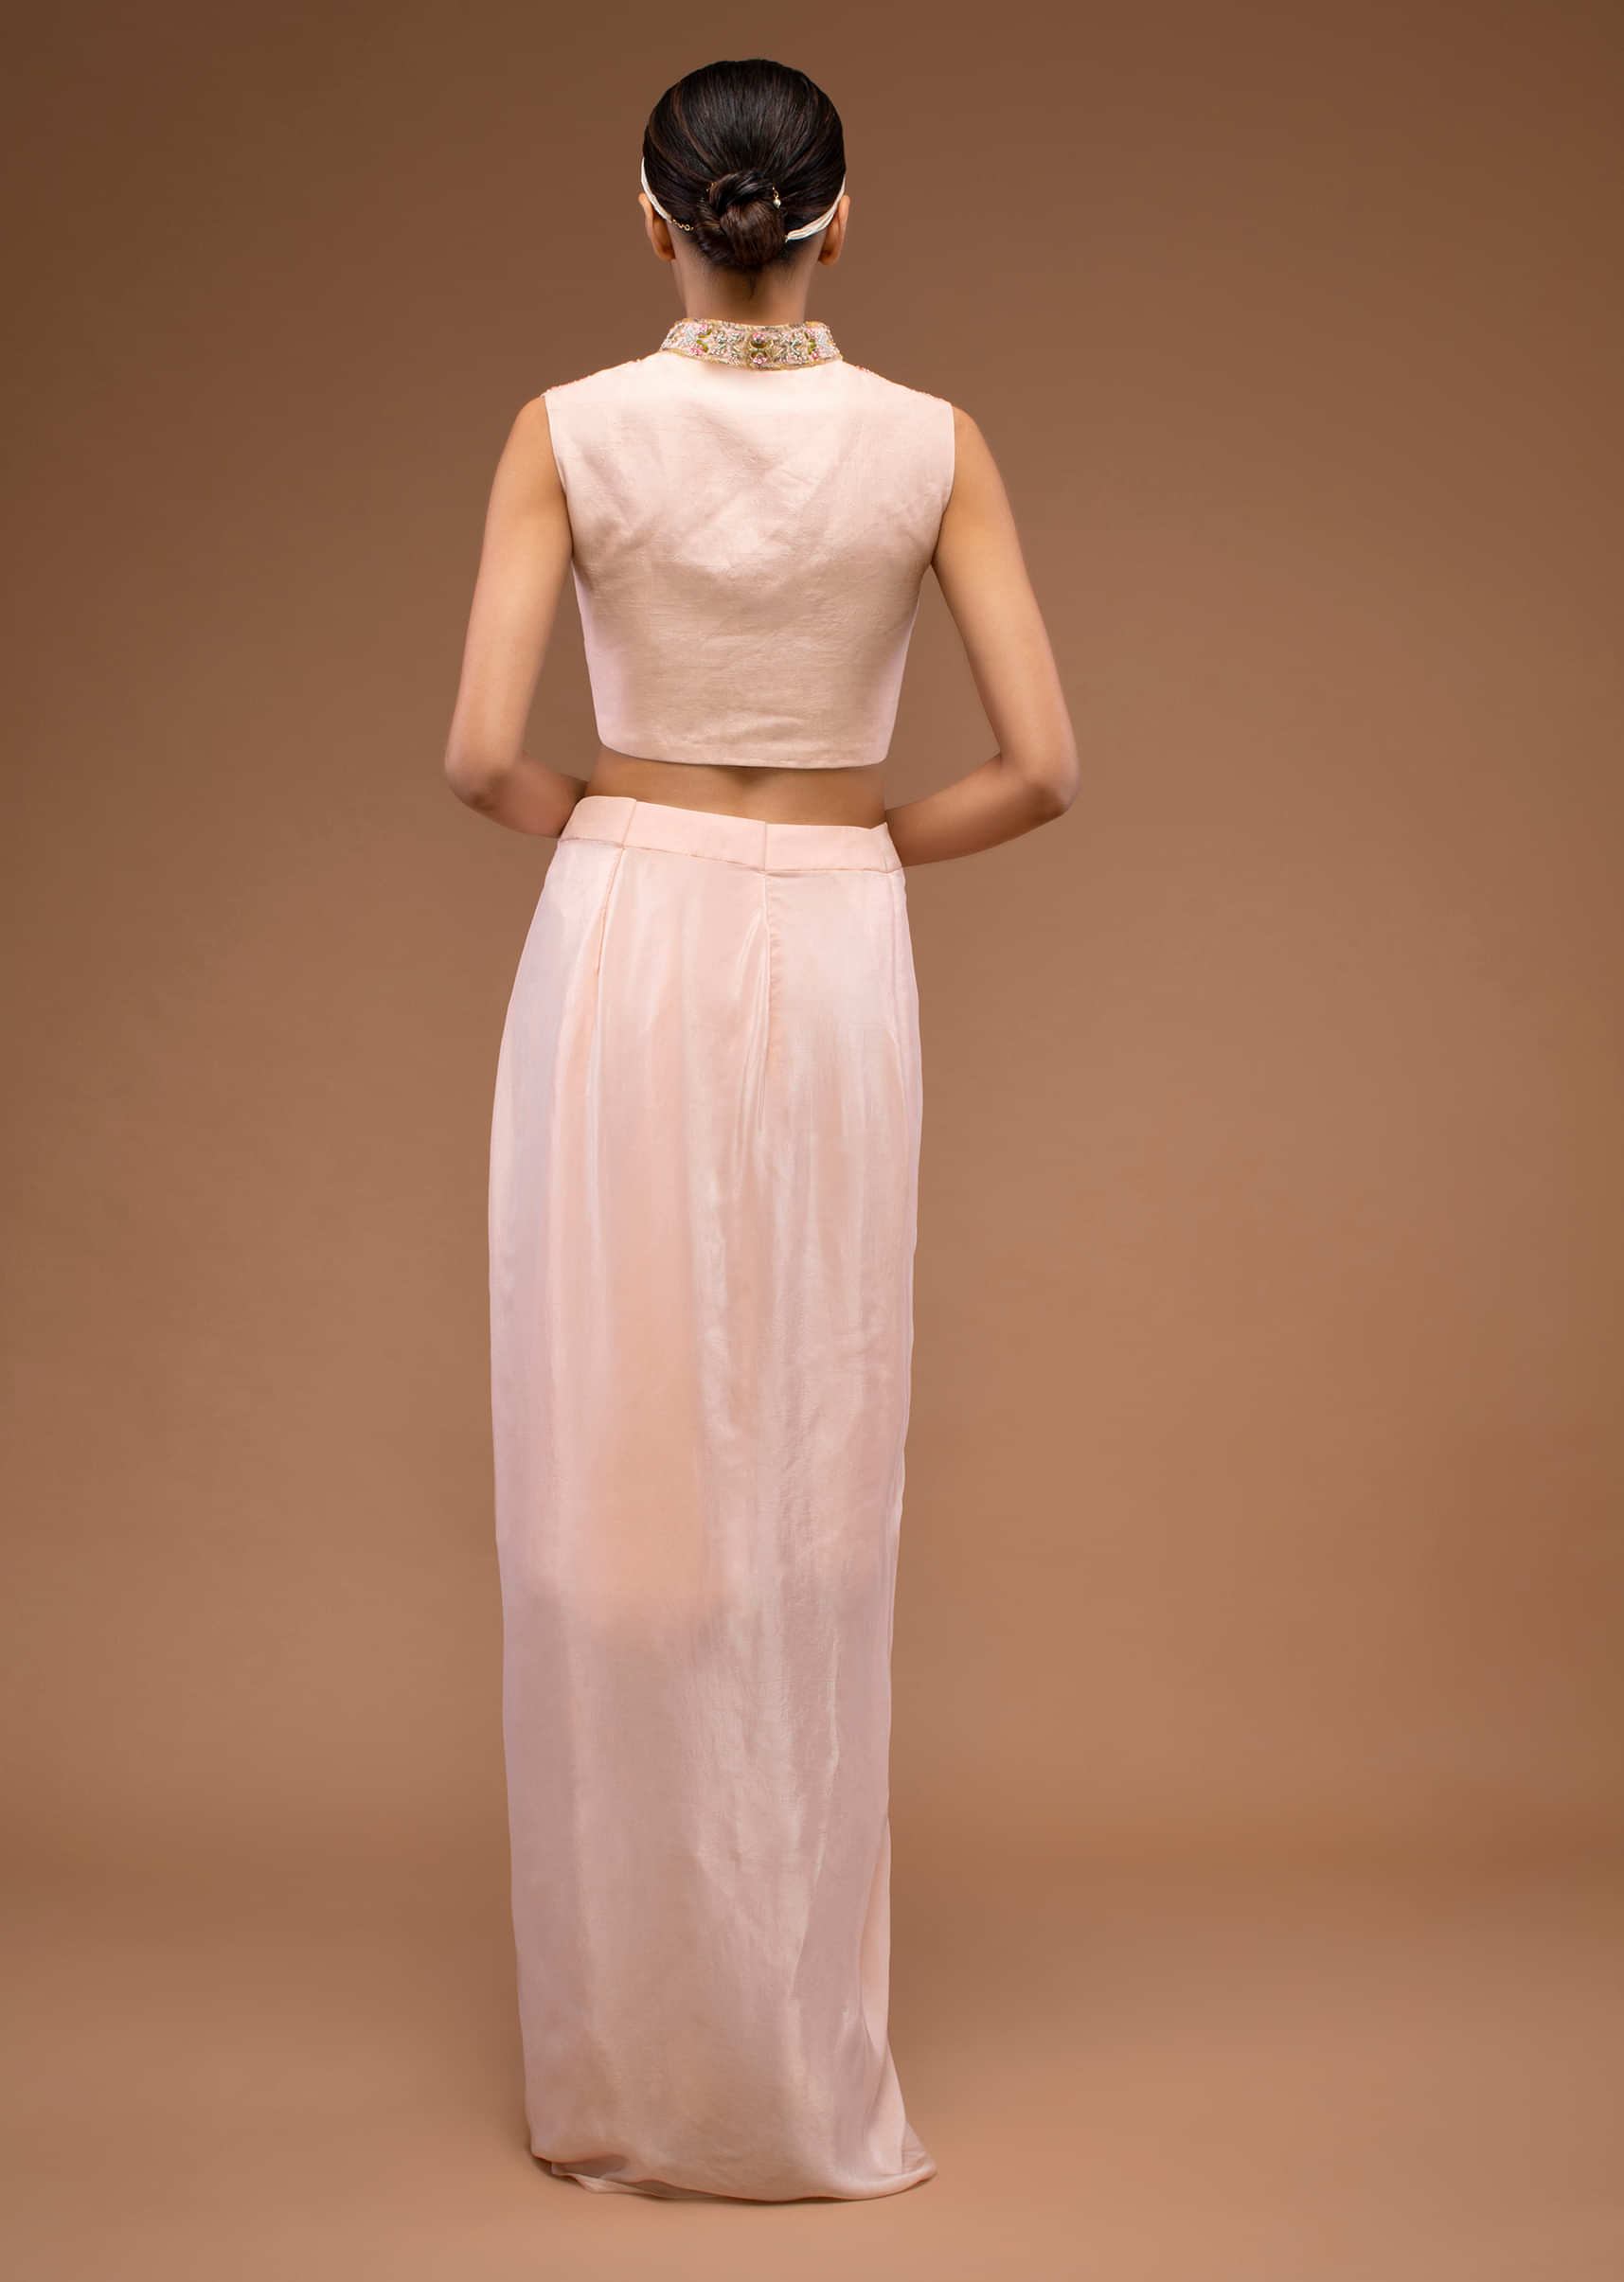 Peach Blush Dhoti Skirt And Crop Top Set In Floral Embroidery, Crafted In Organza With A Side Zip And Hooks Closure